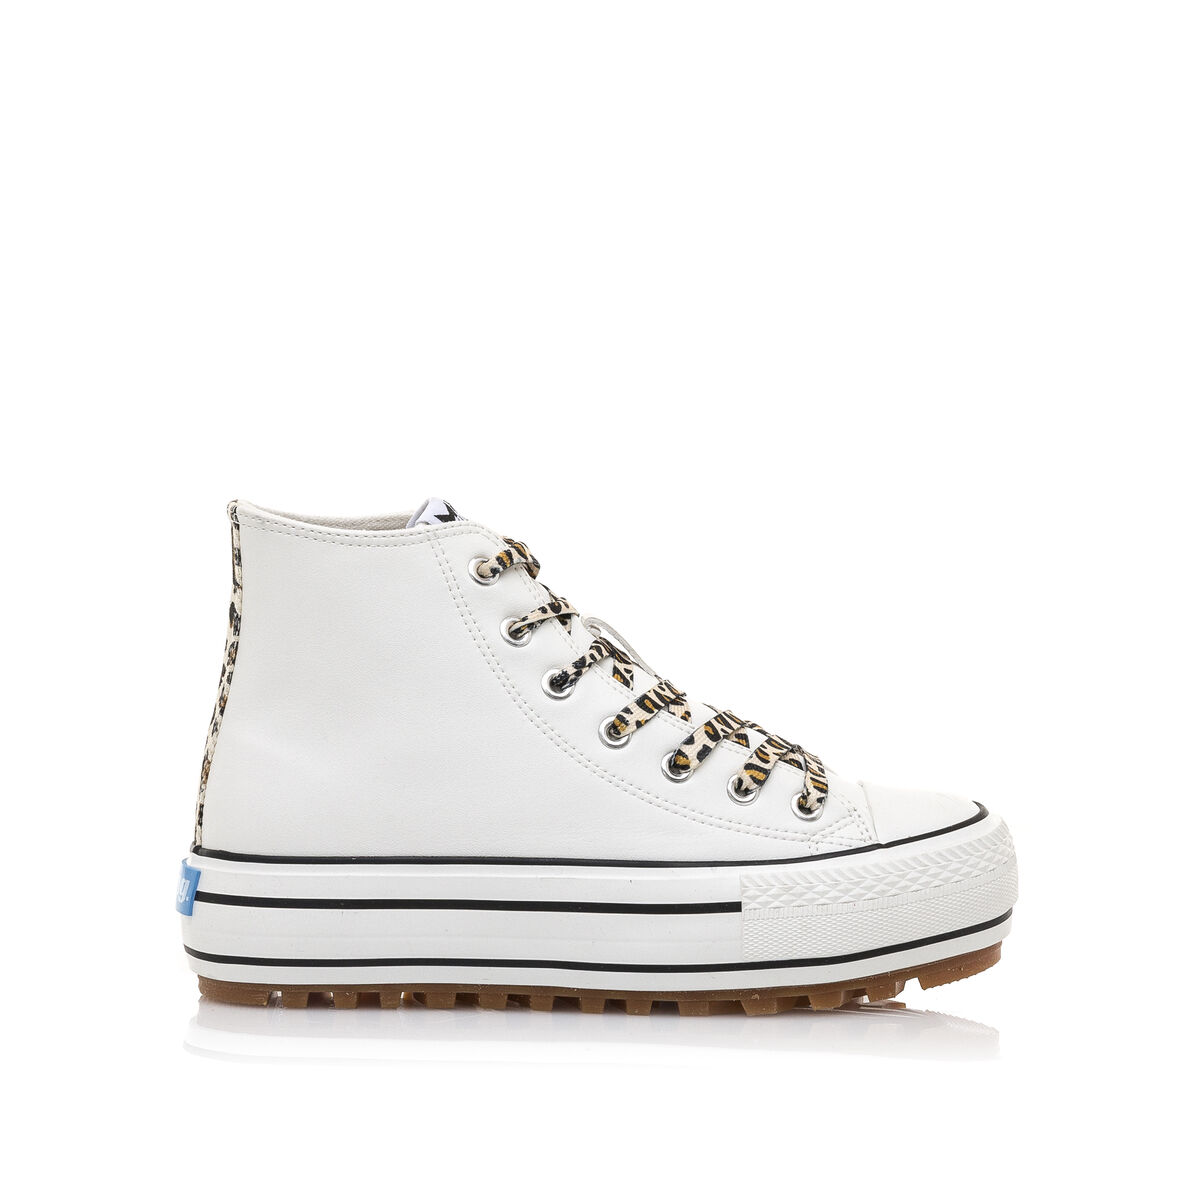 MTNG HIGH TOP WHITE SNEAKERS